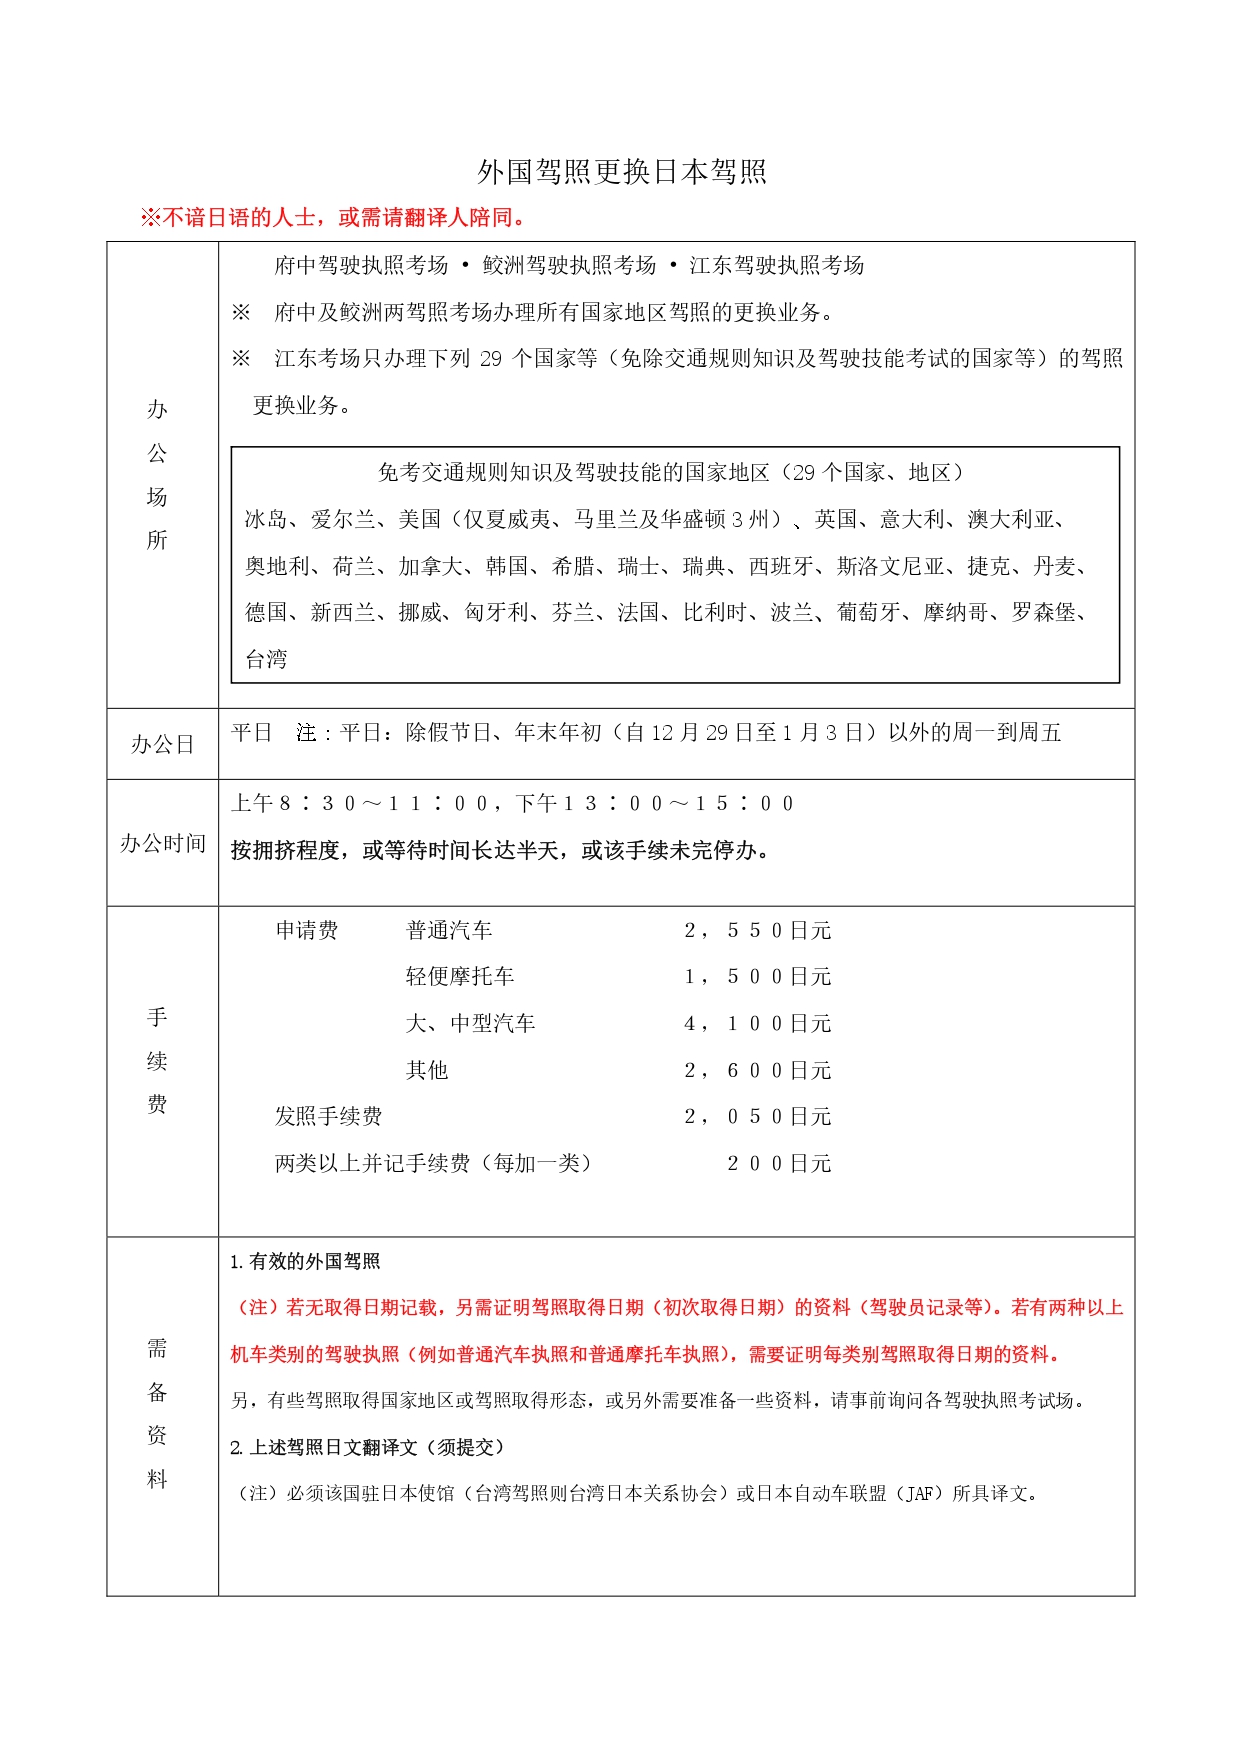 convert_license_chinese_page-0001.jpg